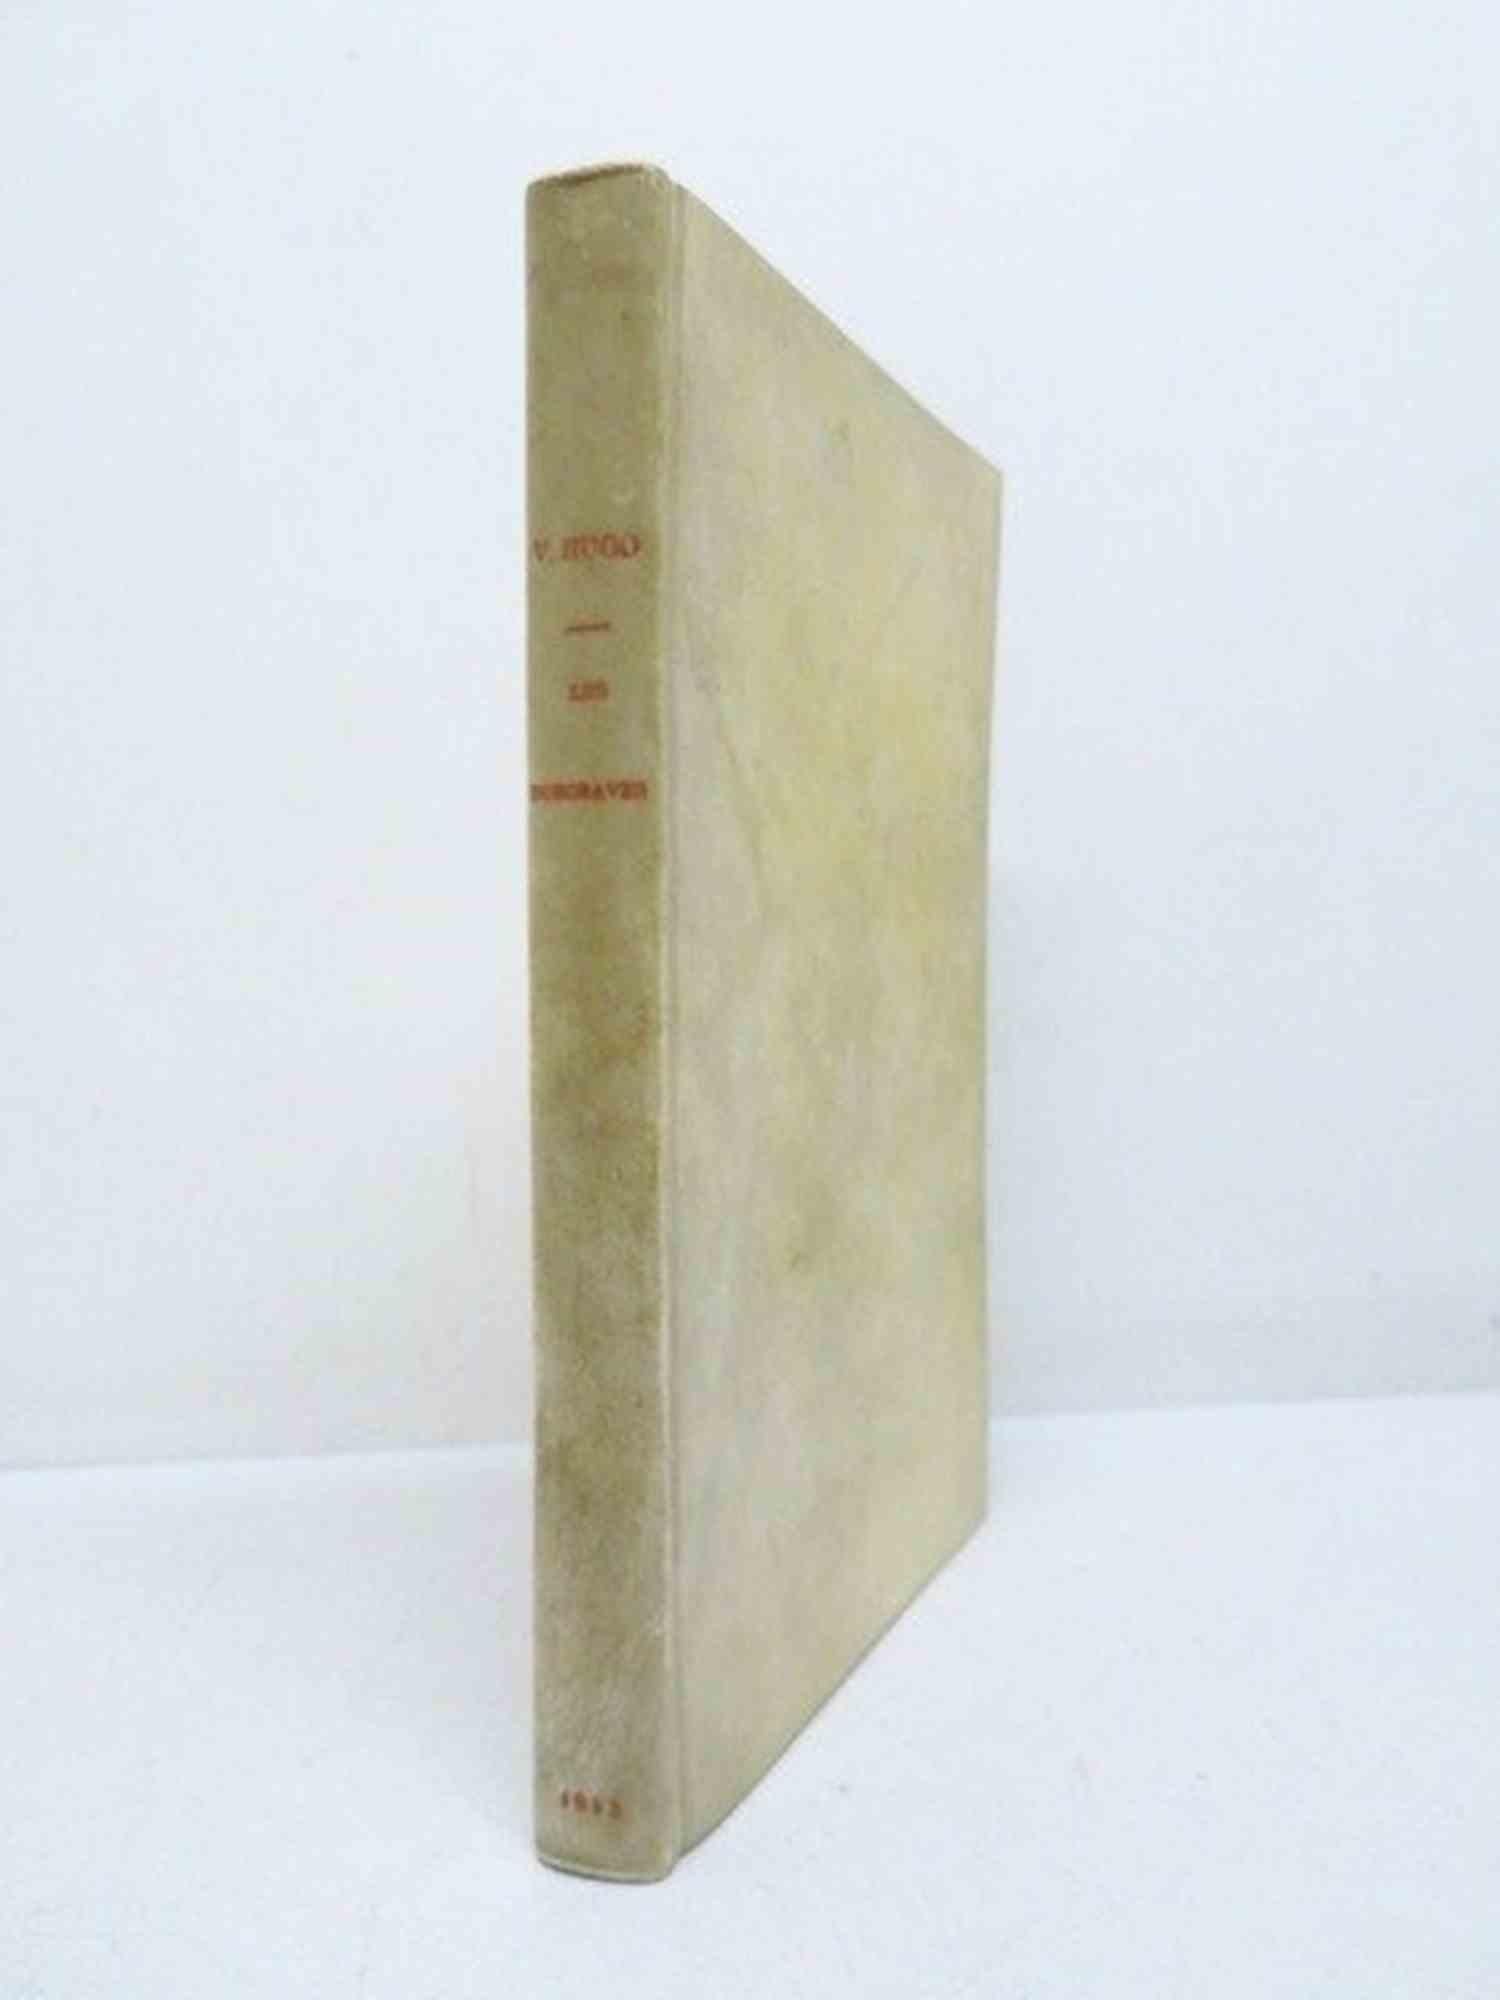 Les Burgraves, une Trilogie - Rare Book by Victor Hugo - 1843 For Sale 5